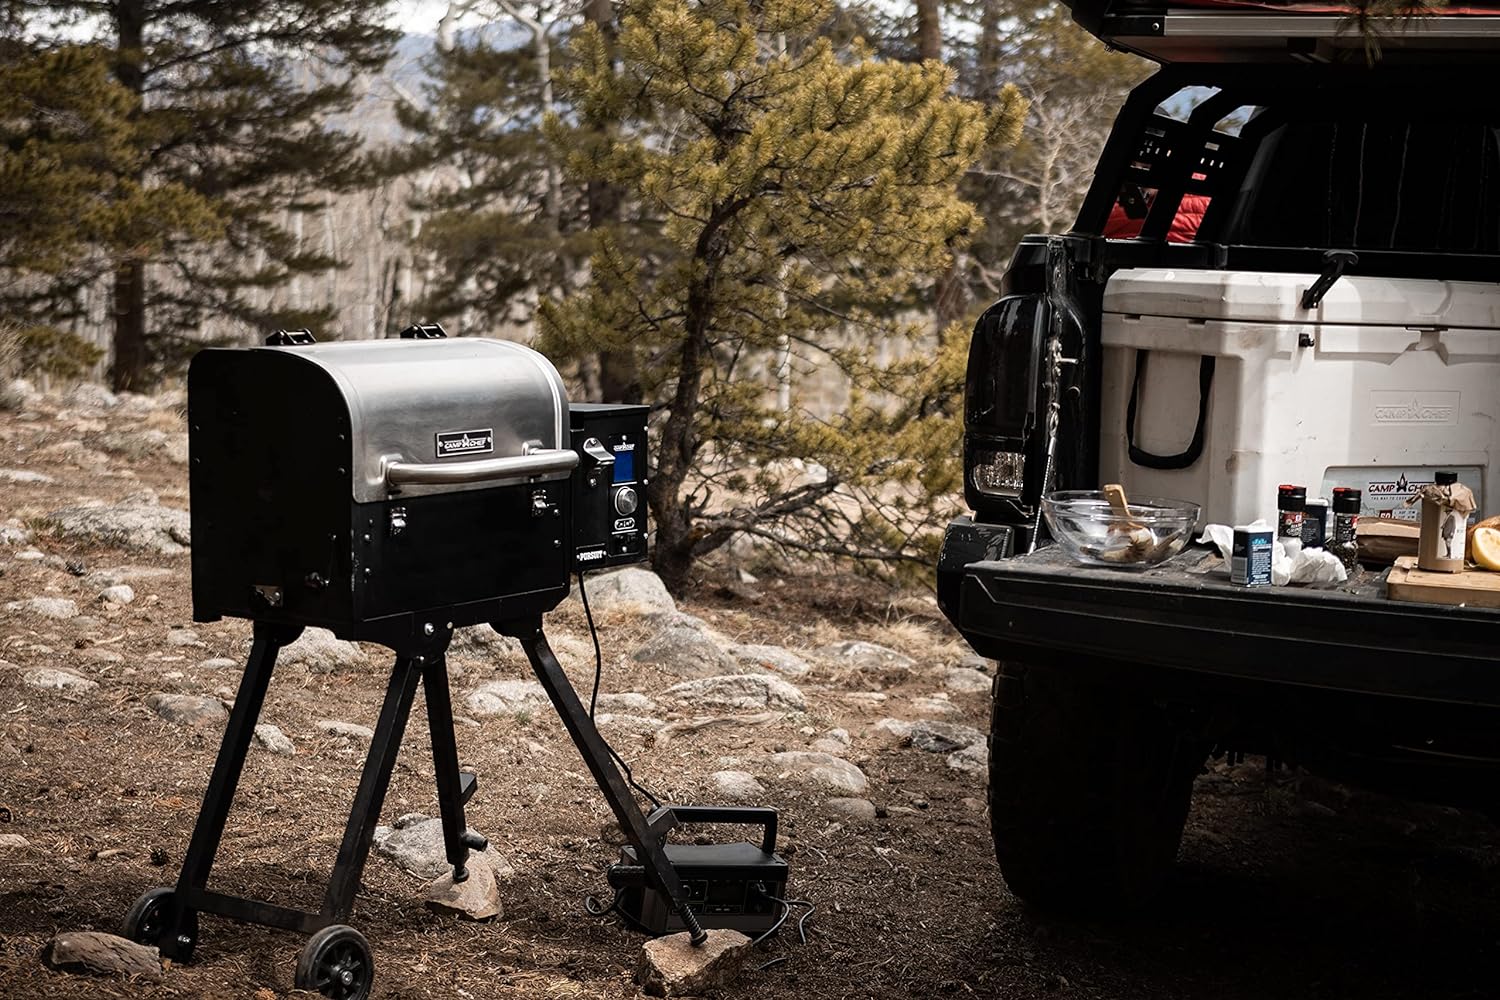 The best portable pellet grill option set up in a wooded area next to a pickup truck bed